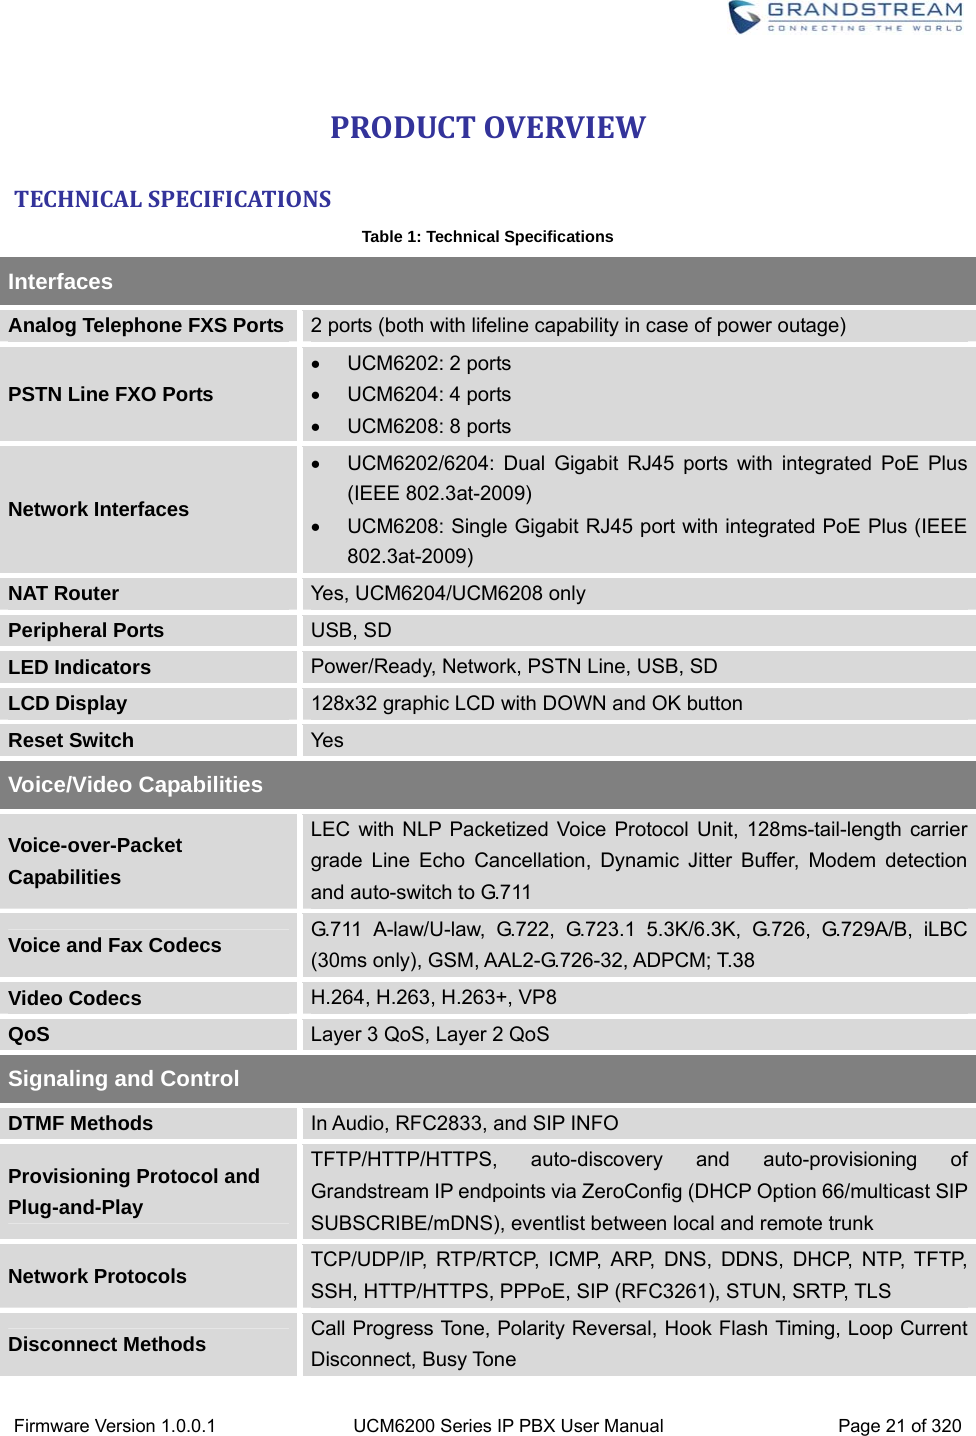  Firmware Version 1.0.0.1  UCM6200 Series IP PBX User Manual  Page 21 of 320 PRODUCTOVERVIEWTECHNICALSPECIFICATIONSTable 1: Technical Specifications Interfaces Analog Telephone FXS Ports 2 ports (both with lifeline capability in case of power outage) PSTN Line FXO Ports  UCM6202: 2 ports  UCM6204: 4 ports  UCM6208: 8 ports Network Interfaces   UCM6202/6204: Dual Gigabit RJ45 ports with integrated PoE Plus (IEEE 802.3at-2009)   UCM6208: Single Gigabit RJ45 port with integrated PoE Plus (IEEE 802.3at-2009) NAT Router Yes, UCM6204/UCM6208 only Peripheral Ports USB, SD LED Indicators Power/Ready, Network, PSTN Line, USB, SD LCD Display 128x32 graphic LCD with DOWN and OK button Reset Switch Yes Voice/Video Capabilities Voice-over-Packet Capabilities LEC with NLP Packetized Voice Protocol Unit, 128ms-tail-length carrier grade Line Echo Cancellation, Dynamic Jitter Buffer, Modem detection and auto-switch to G.711 Voice and Fax Codecs G.711 A-law/U-law, G.722, G.723.1 5.3K/6.3K, G.726, G.729A/B, iLBC (30ms only), GSM, AAL2-G.726-32, ADPCM; T.38 Video Codecs H.264, H.263, H.263+, VP8 QoS Layer 3 QoS, Layer 2 QoS Signaling and Control DTMF Methods In Audio, RFC2833, and SIP INFO Provisioning Protocol and   Plug-and-Play TFTP/HTTP/HTTPS, auto-discovery and auto-provisioning of Grandstream IP endpoints via ZeroConfig (DHCP Option 66/multicast SIP SUBSCRIBE/mDNS), eventlist between local and remote trunk Network Protocols TCP/UDP/IP, RTP/RTCP, ICMP, ARP, DNS, DDNS, DHCP, NTP, TFTP, SSH, HTTP/HTTPS, PPPoE, SIP (RFC3261), STUN, SRTP, TLS Disconnect Methods Call Progress Tone, Polarity Reversal, Hook Flash Timing, Loop Current Disconnect, Busy Tone 